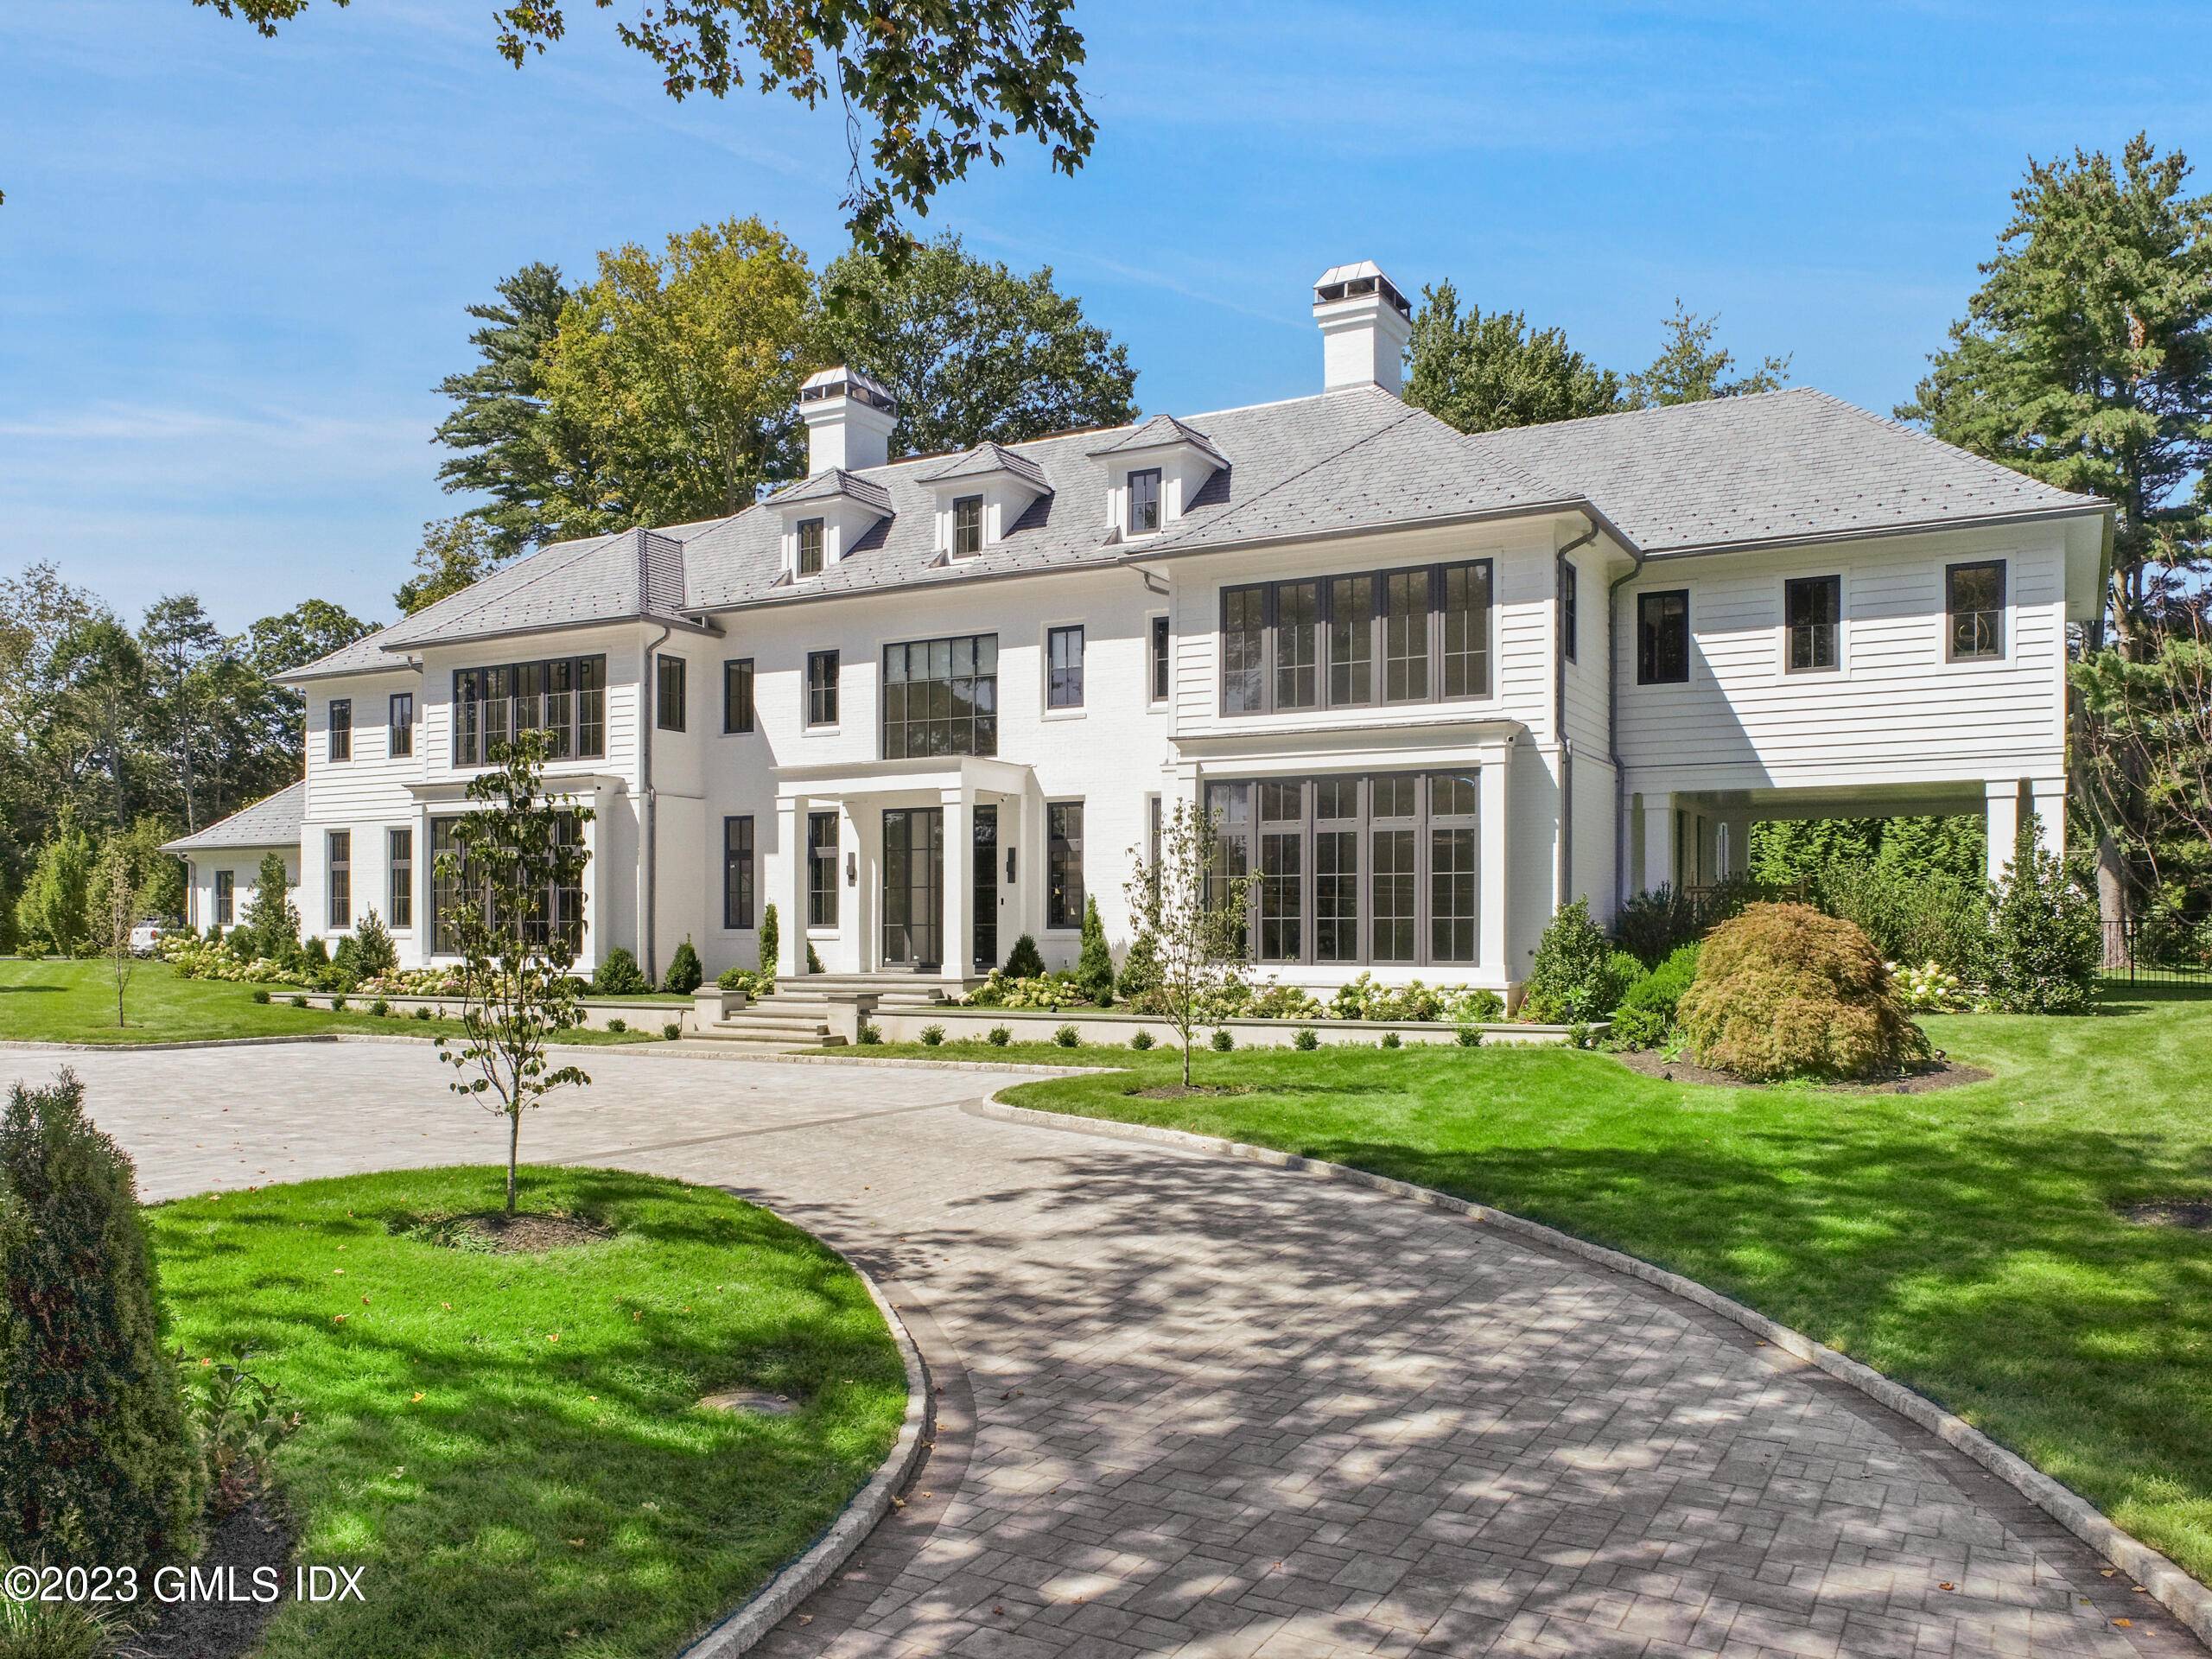 This Deer Park Association, Brick and Clapboard, Georgian Colonial has been meticulously crafted by local Hobi Award winning developer, continuing to raise the bar for the finest living in Greenwich ...